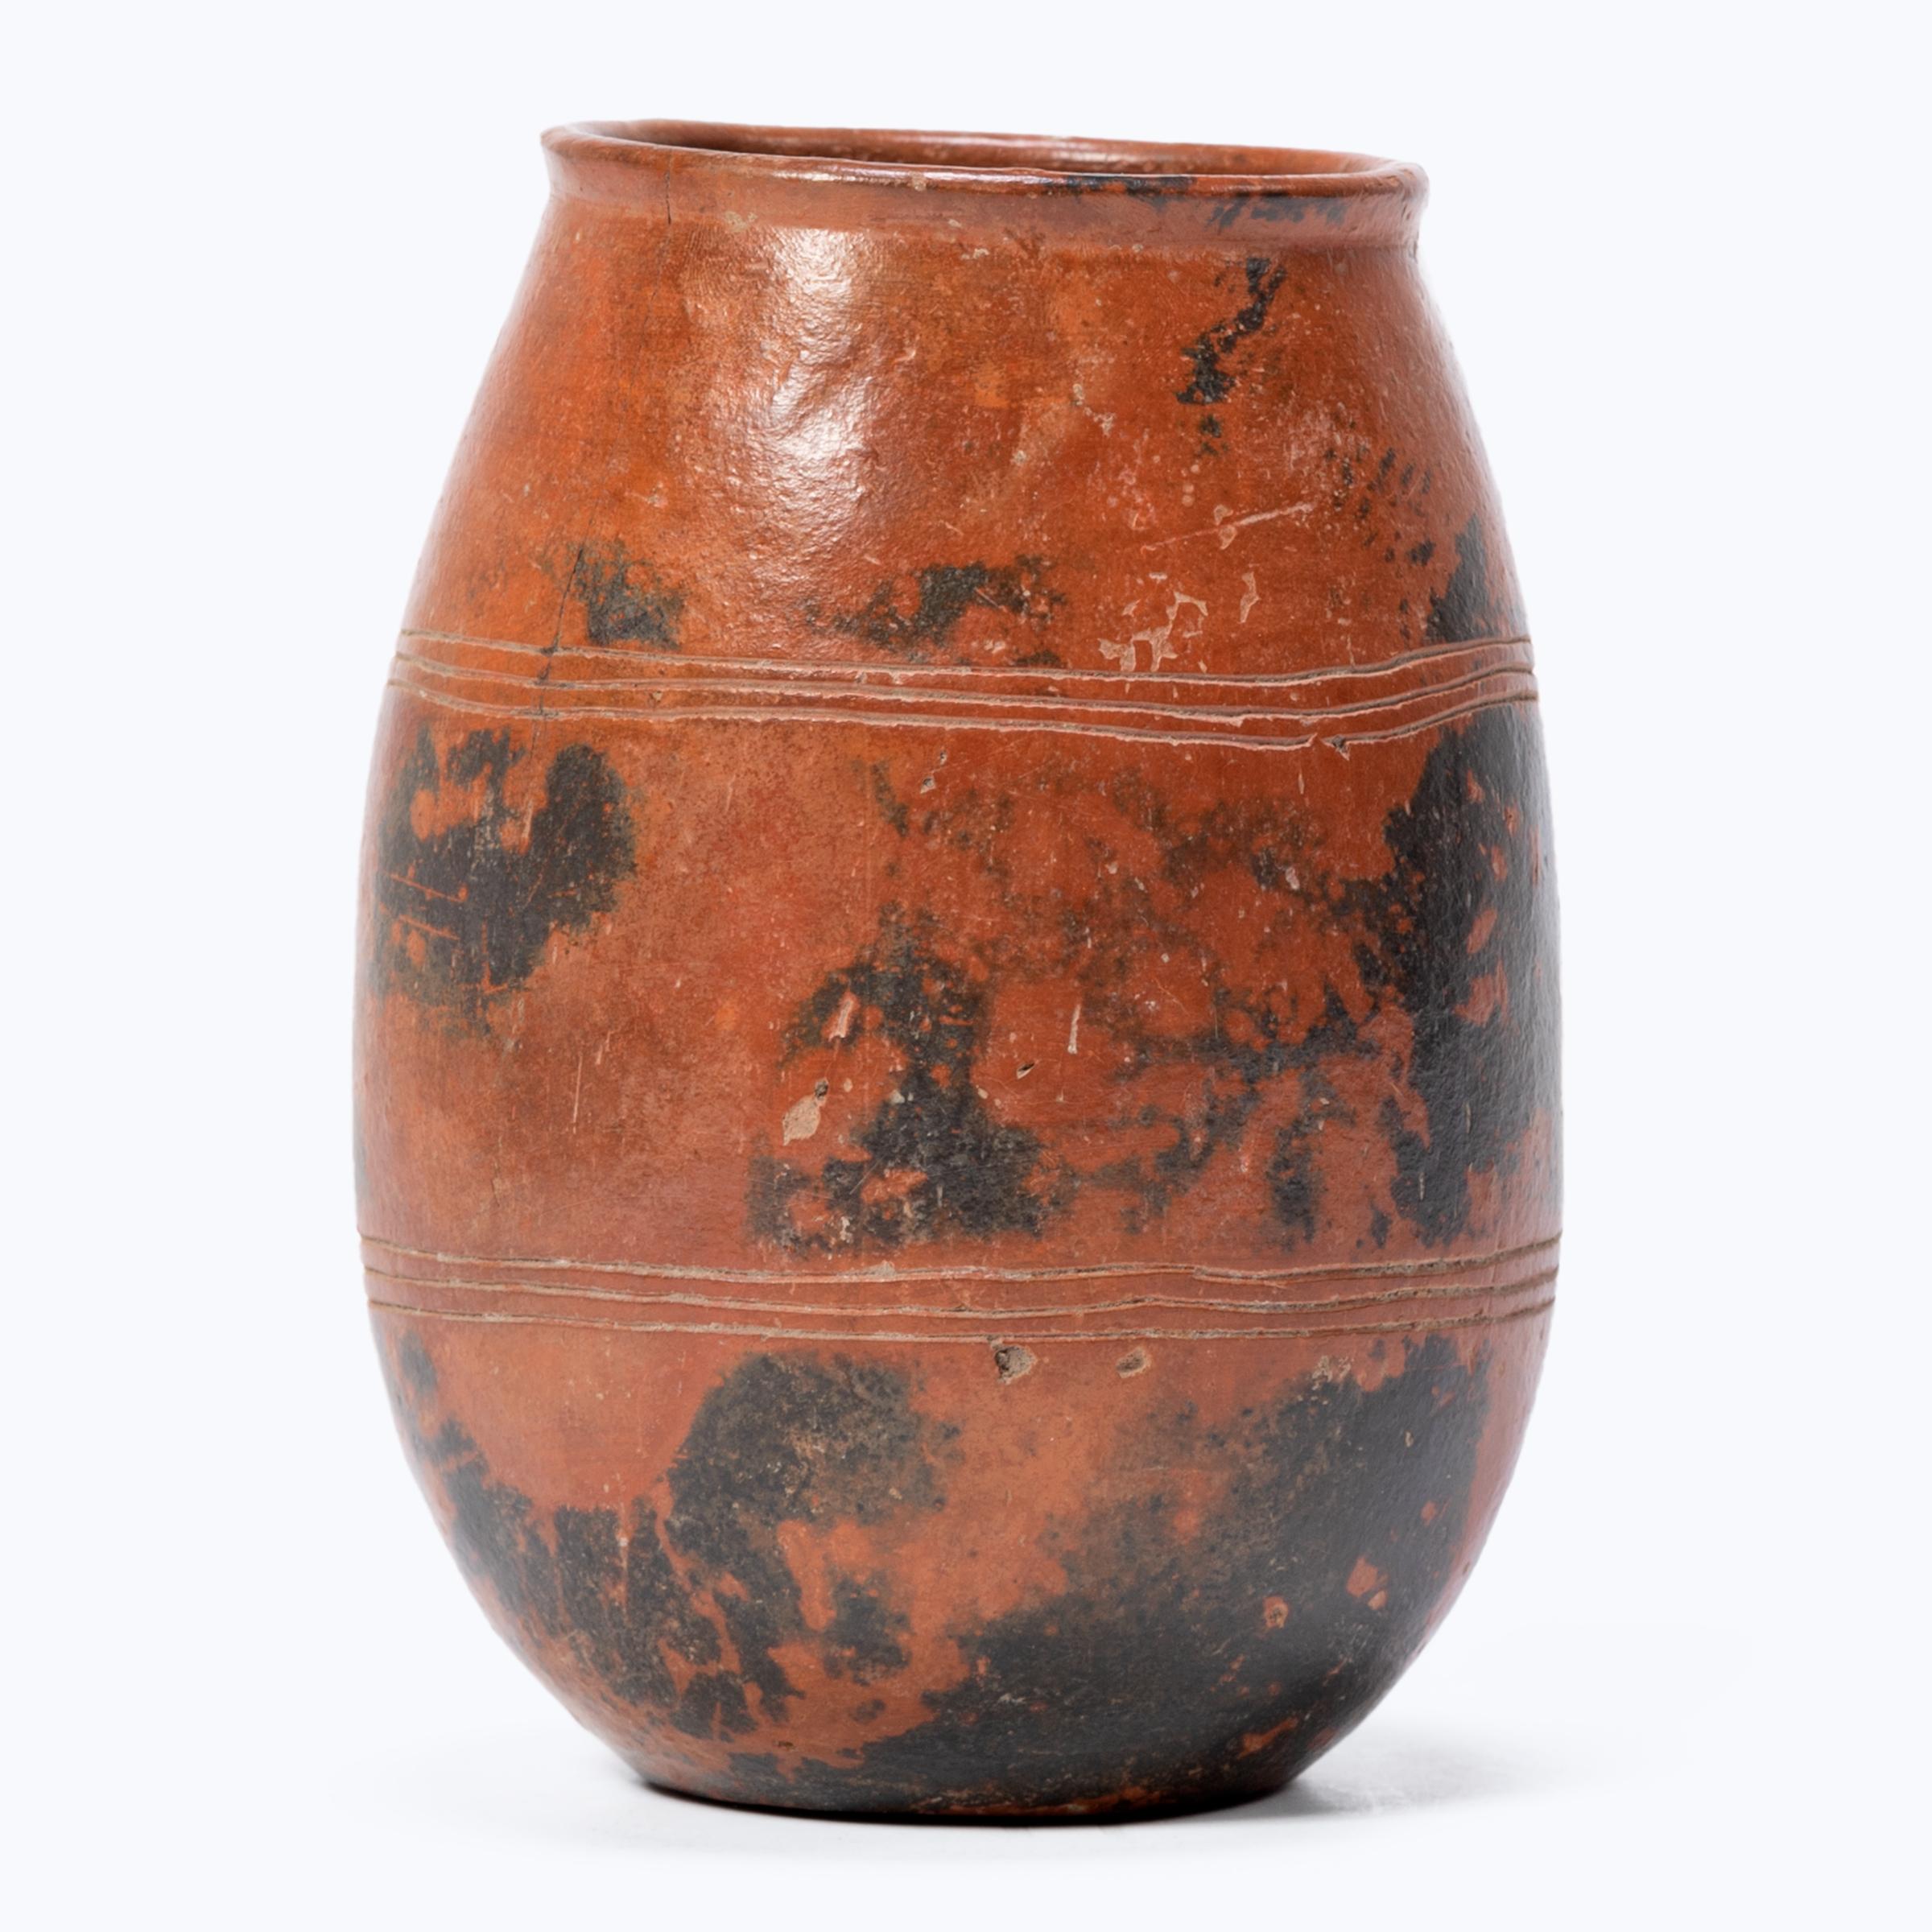 This elegant redware vessel is an exquisite example of Maya ceramics. Finely sculpted with thin walls and a balanced form, In a process known as 